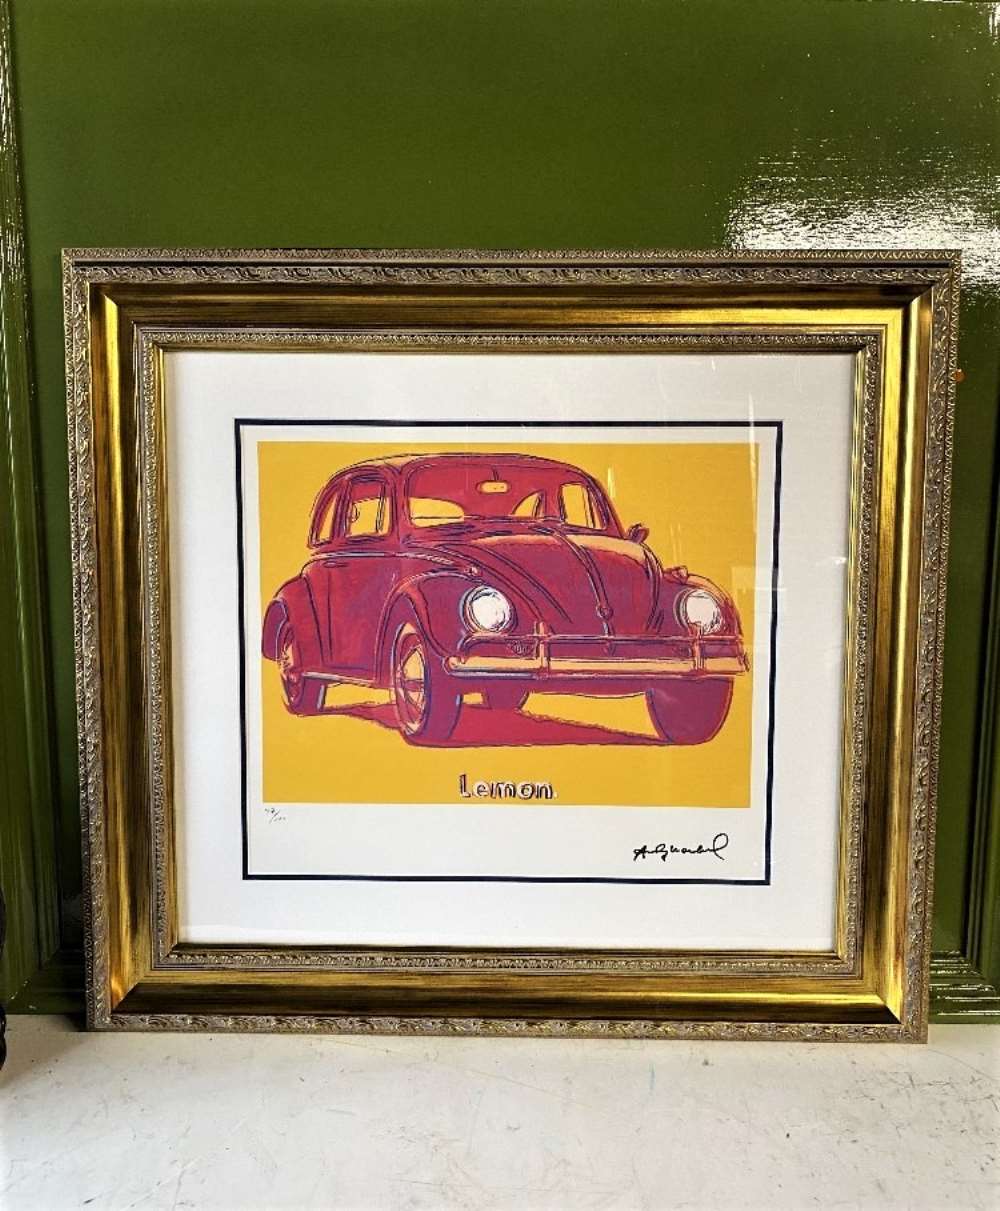 Andy Warhol (1928-1987) “The Beetle” Leo Castelli Gallery-New York Numbered Ltd Edition of 100 Litho